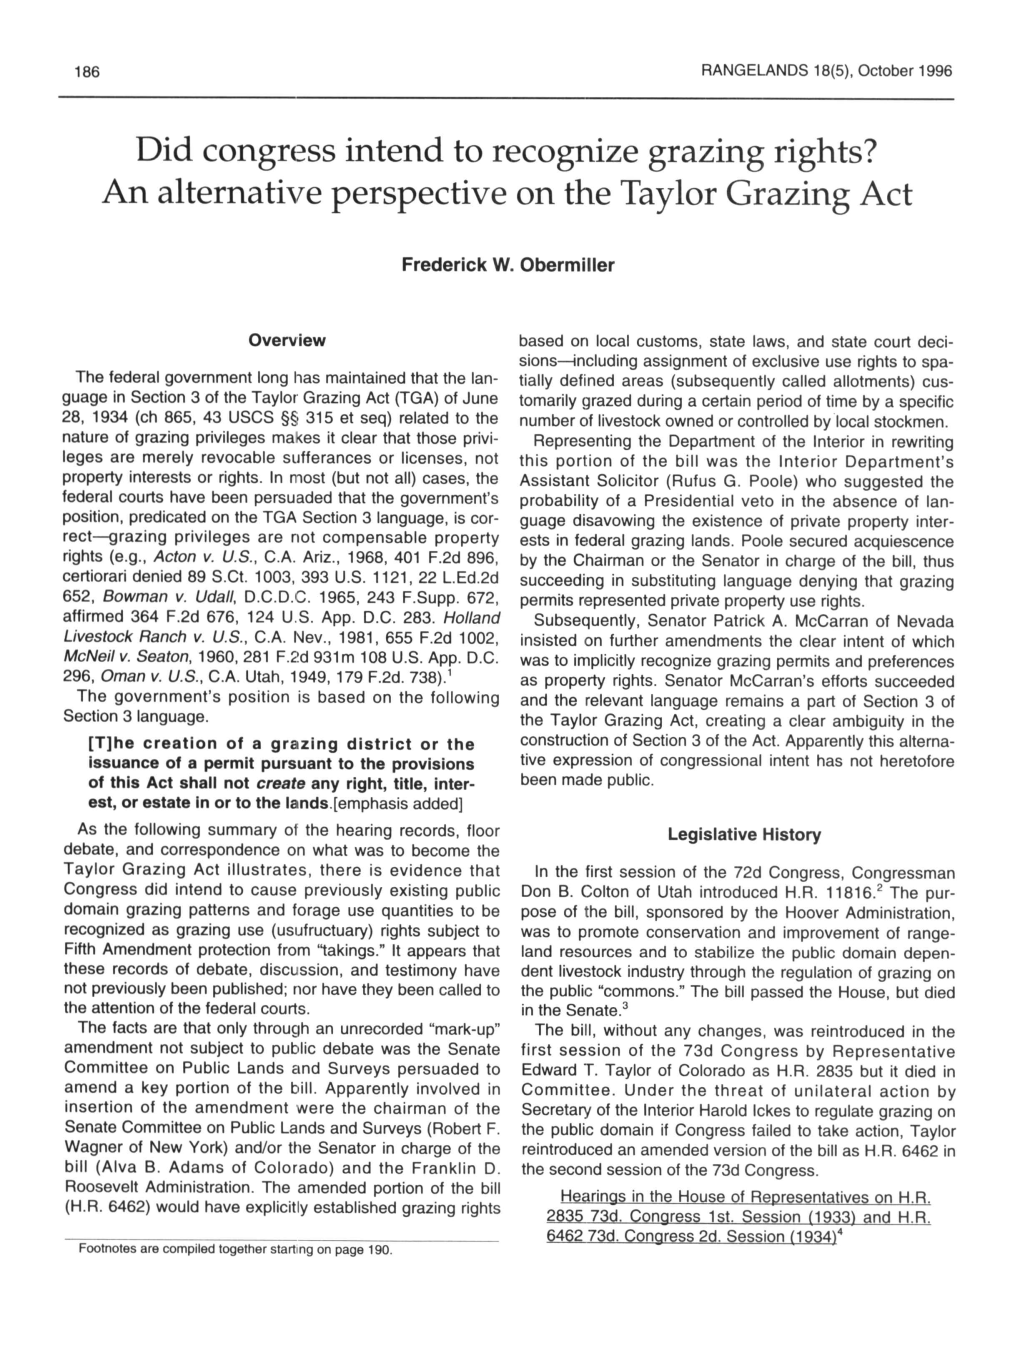 Did Congress Intend to Recognize Grazing Rights? an Alternative Perspective on the Taylor Grazing Act